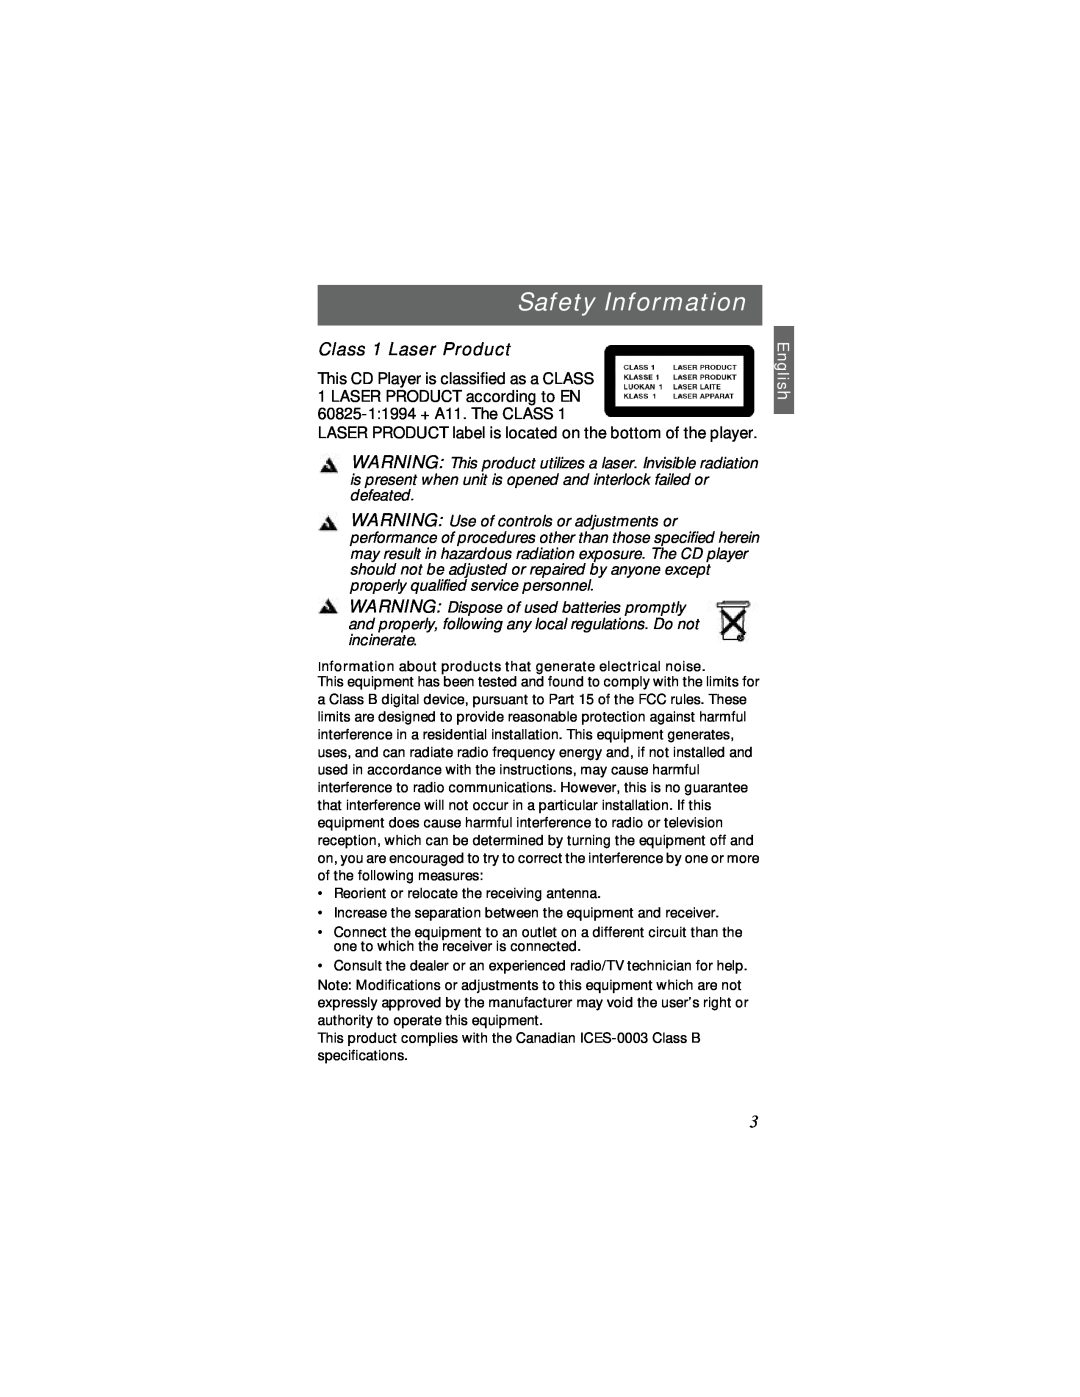 Bose SM1 manual Safety Information, Class 1 Laser Product, English 